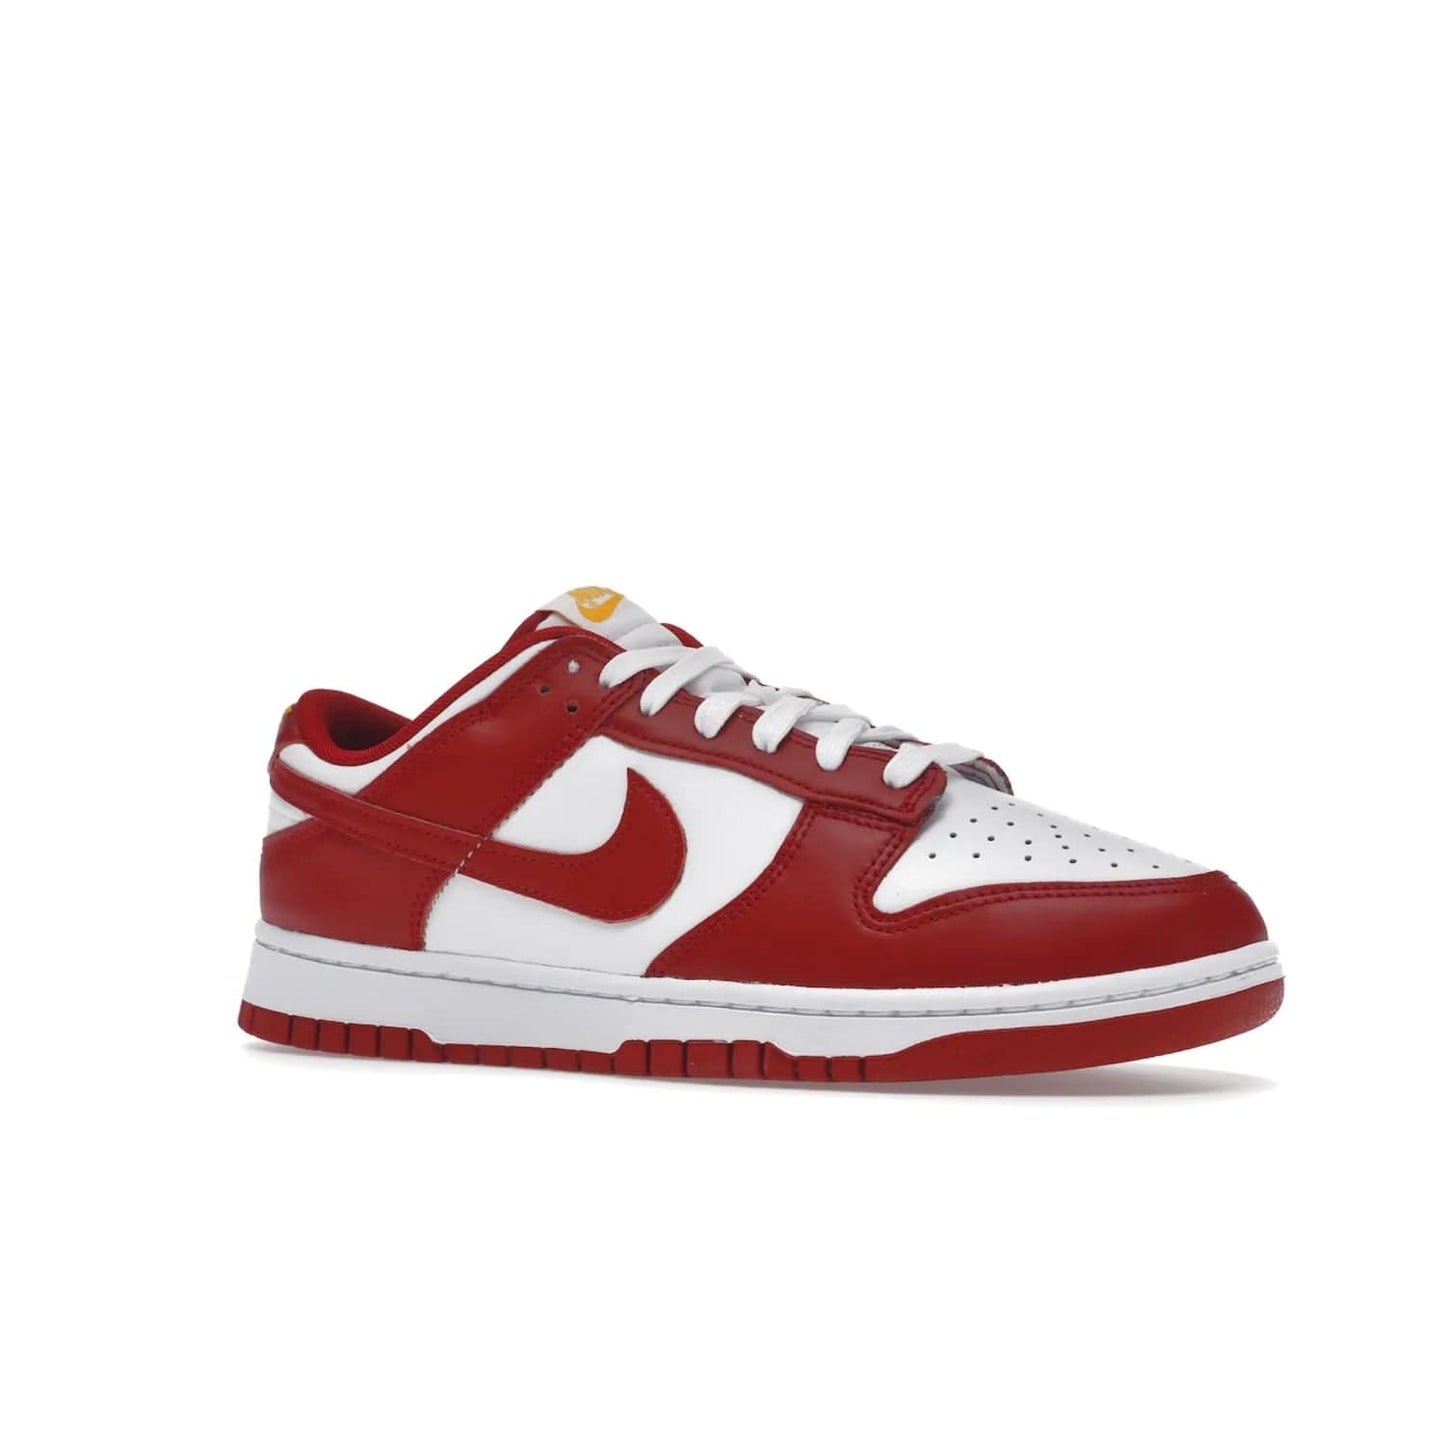 Nike Dunk Low USC - Image 4 - Only at www.BallersClubKickz.com - The Nike Dunk Low USC DD1391-602 colorway captures the eye of University of Southern California fans. Crafted with leather and rubber upper and outsole, this stylish sneaker features a white, gym red, and yellow colorway. With yellow Nike branding, white perforated vamp, and red suede Swoosh, this sneaker turns heads. Get the classic Nike Dunk Low USC releasing on November 9th, 2022.